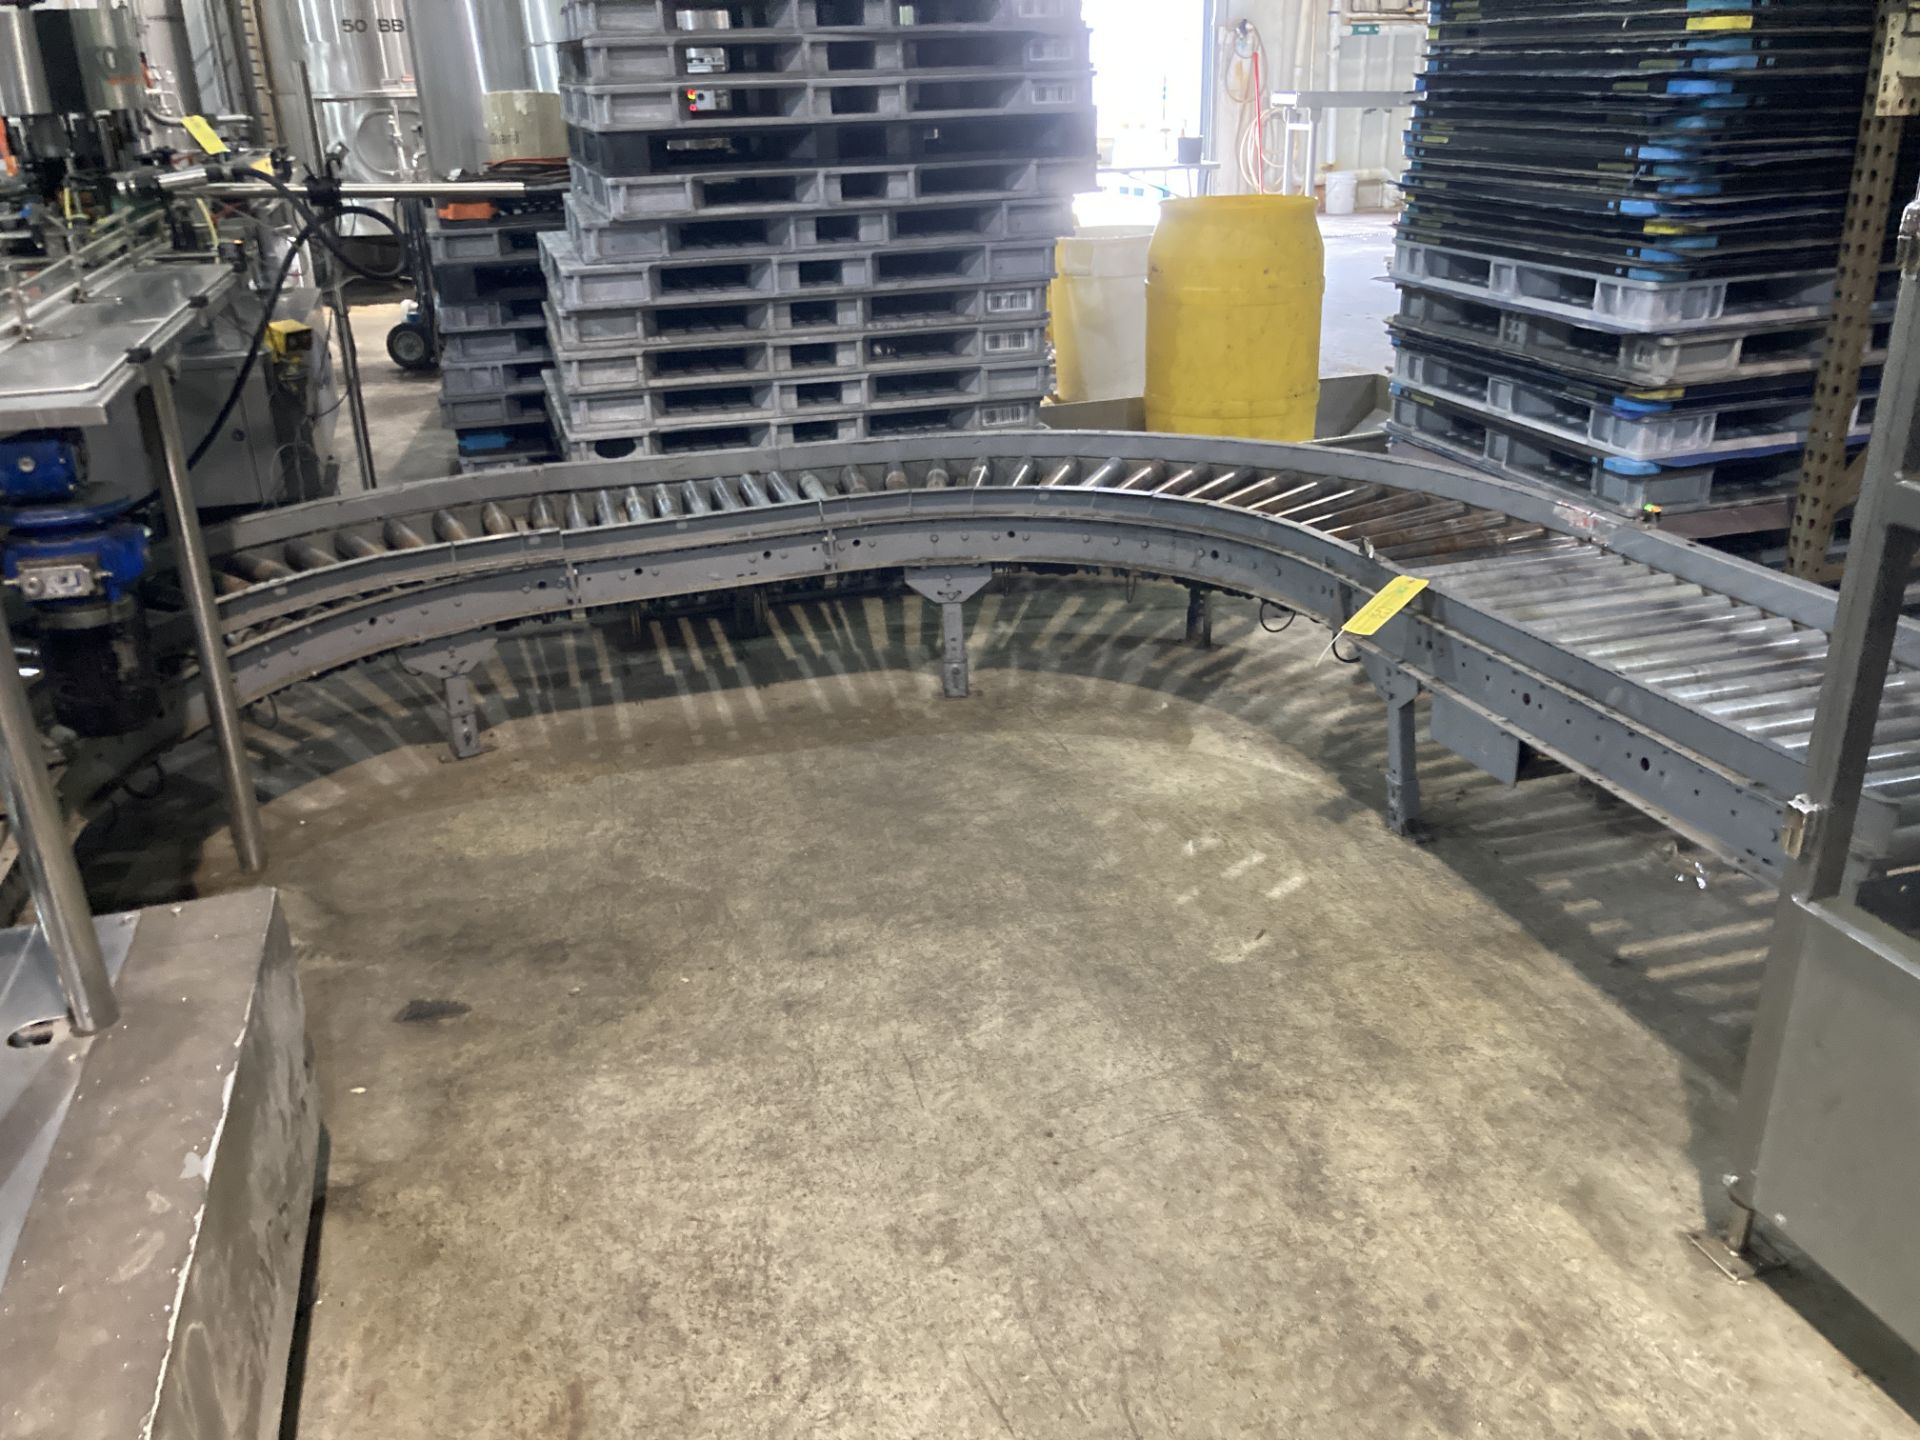 Live roller 180 degree curve conveyor , 22 in wide ***Rigging and Loading Fee of$: TBD will be